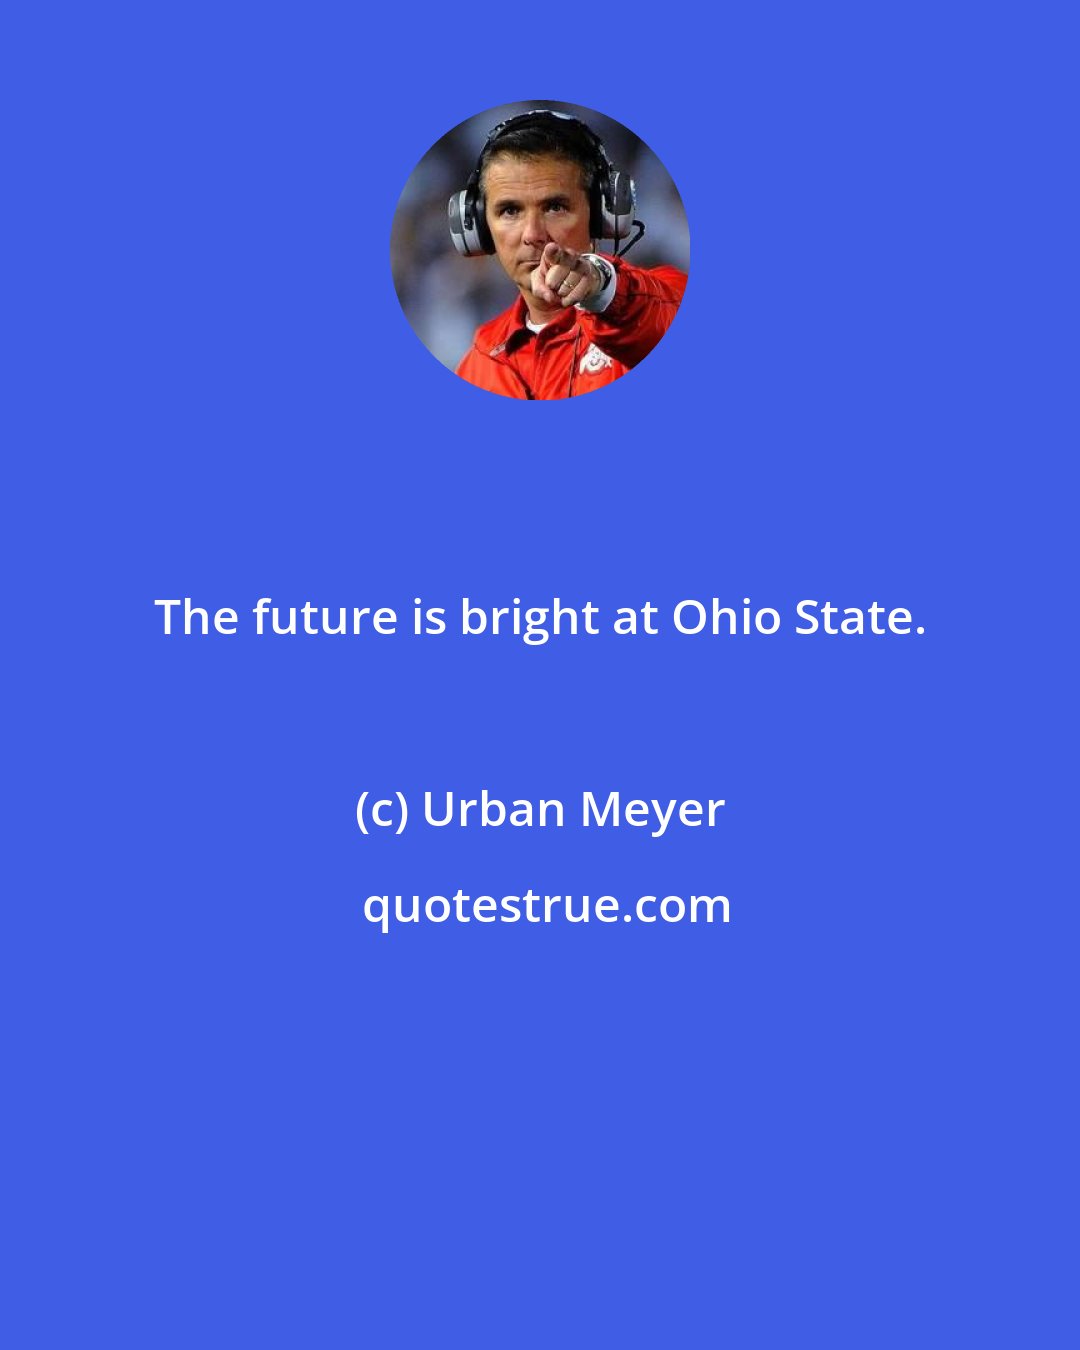 Urban Meyer: The future is bright at Ohio State.